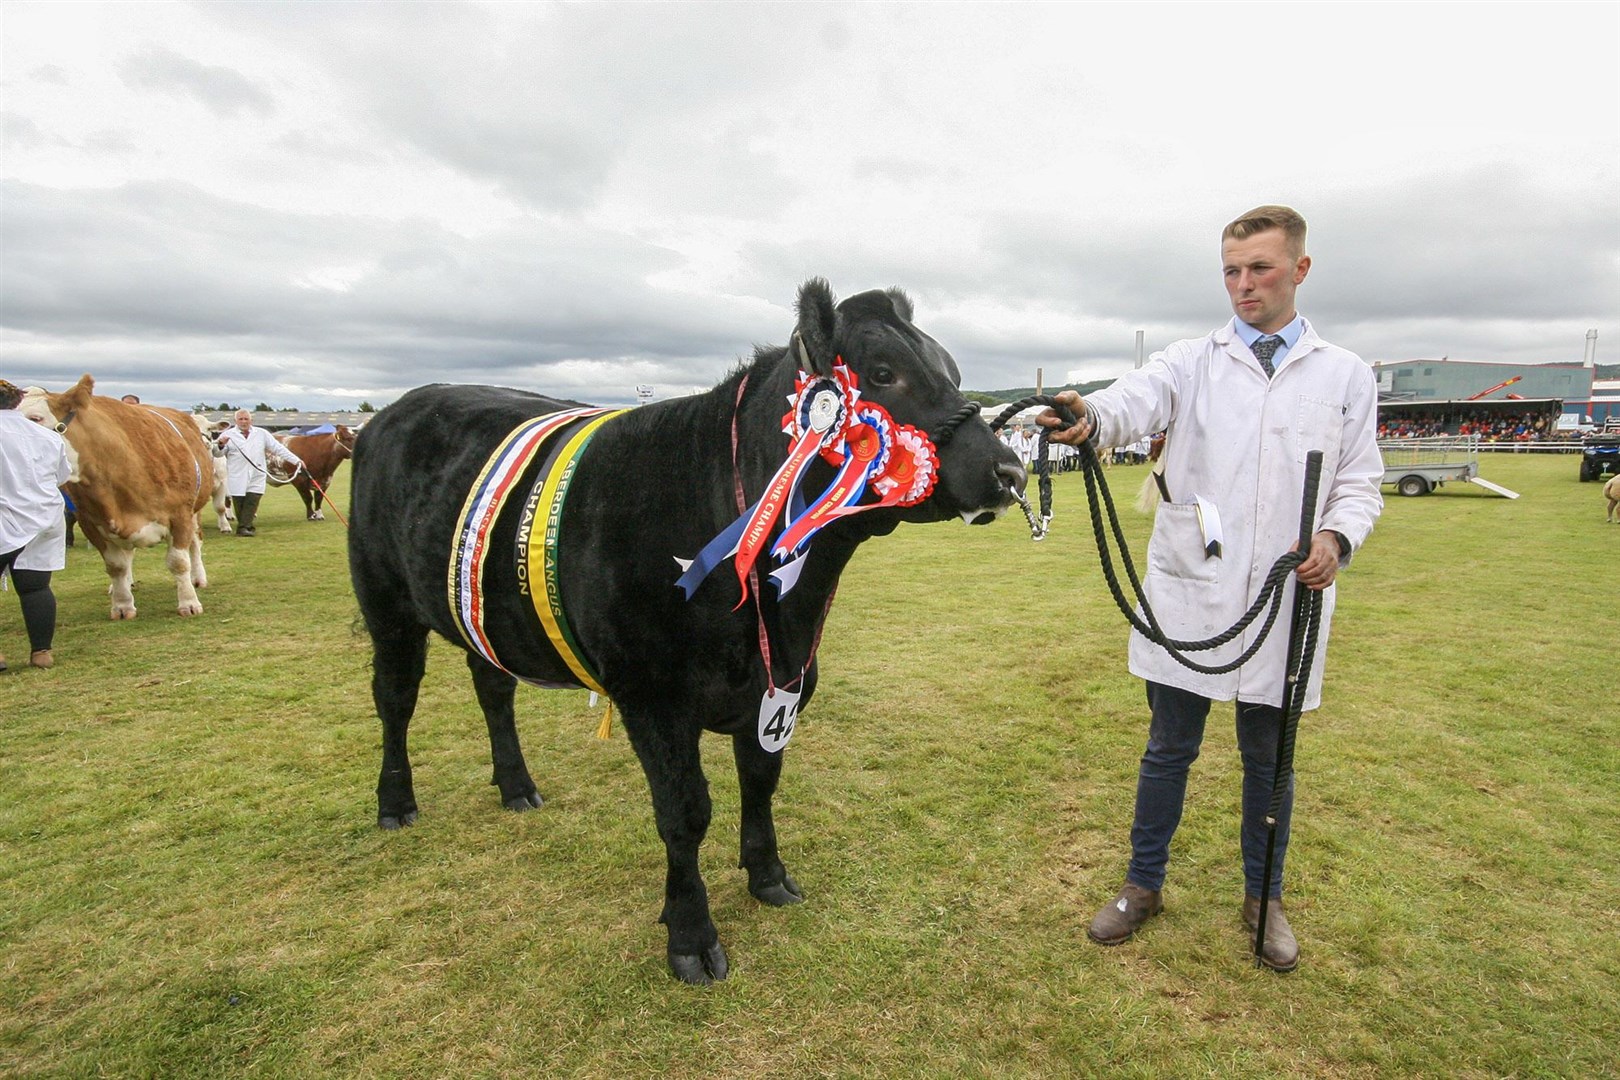 Aberdeen Angus Champion - A&K Rhind & Son, Newton of Struthers. Photo: Marc Hindley/Black Isle Show